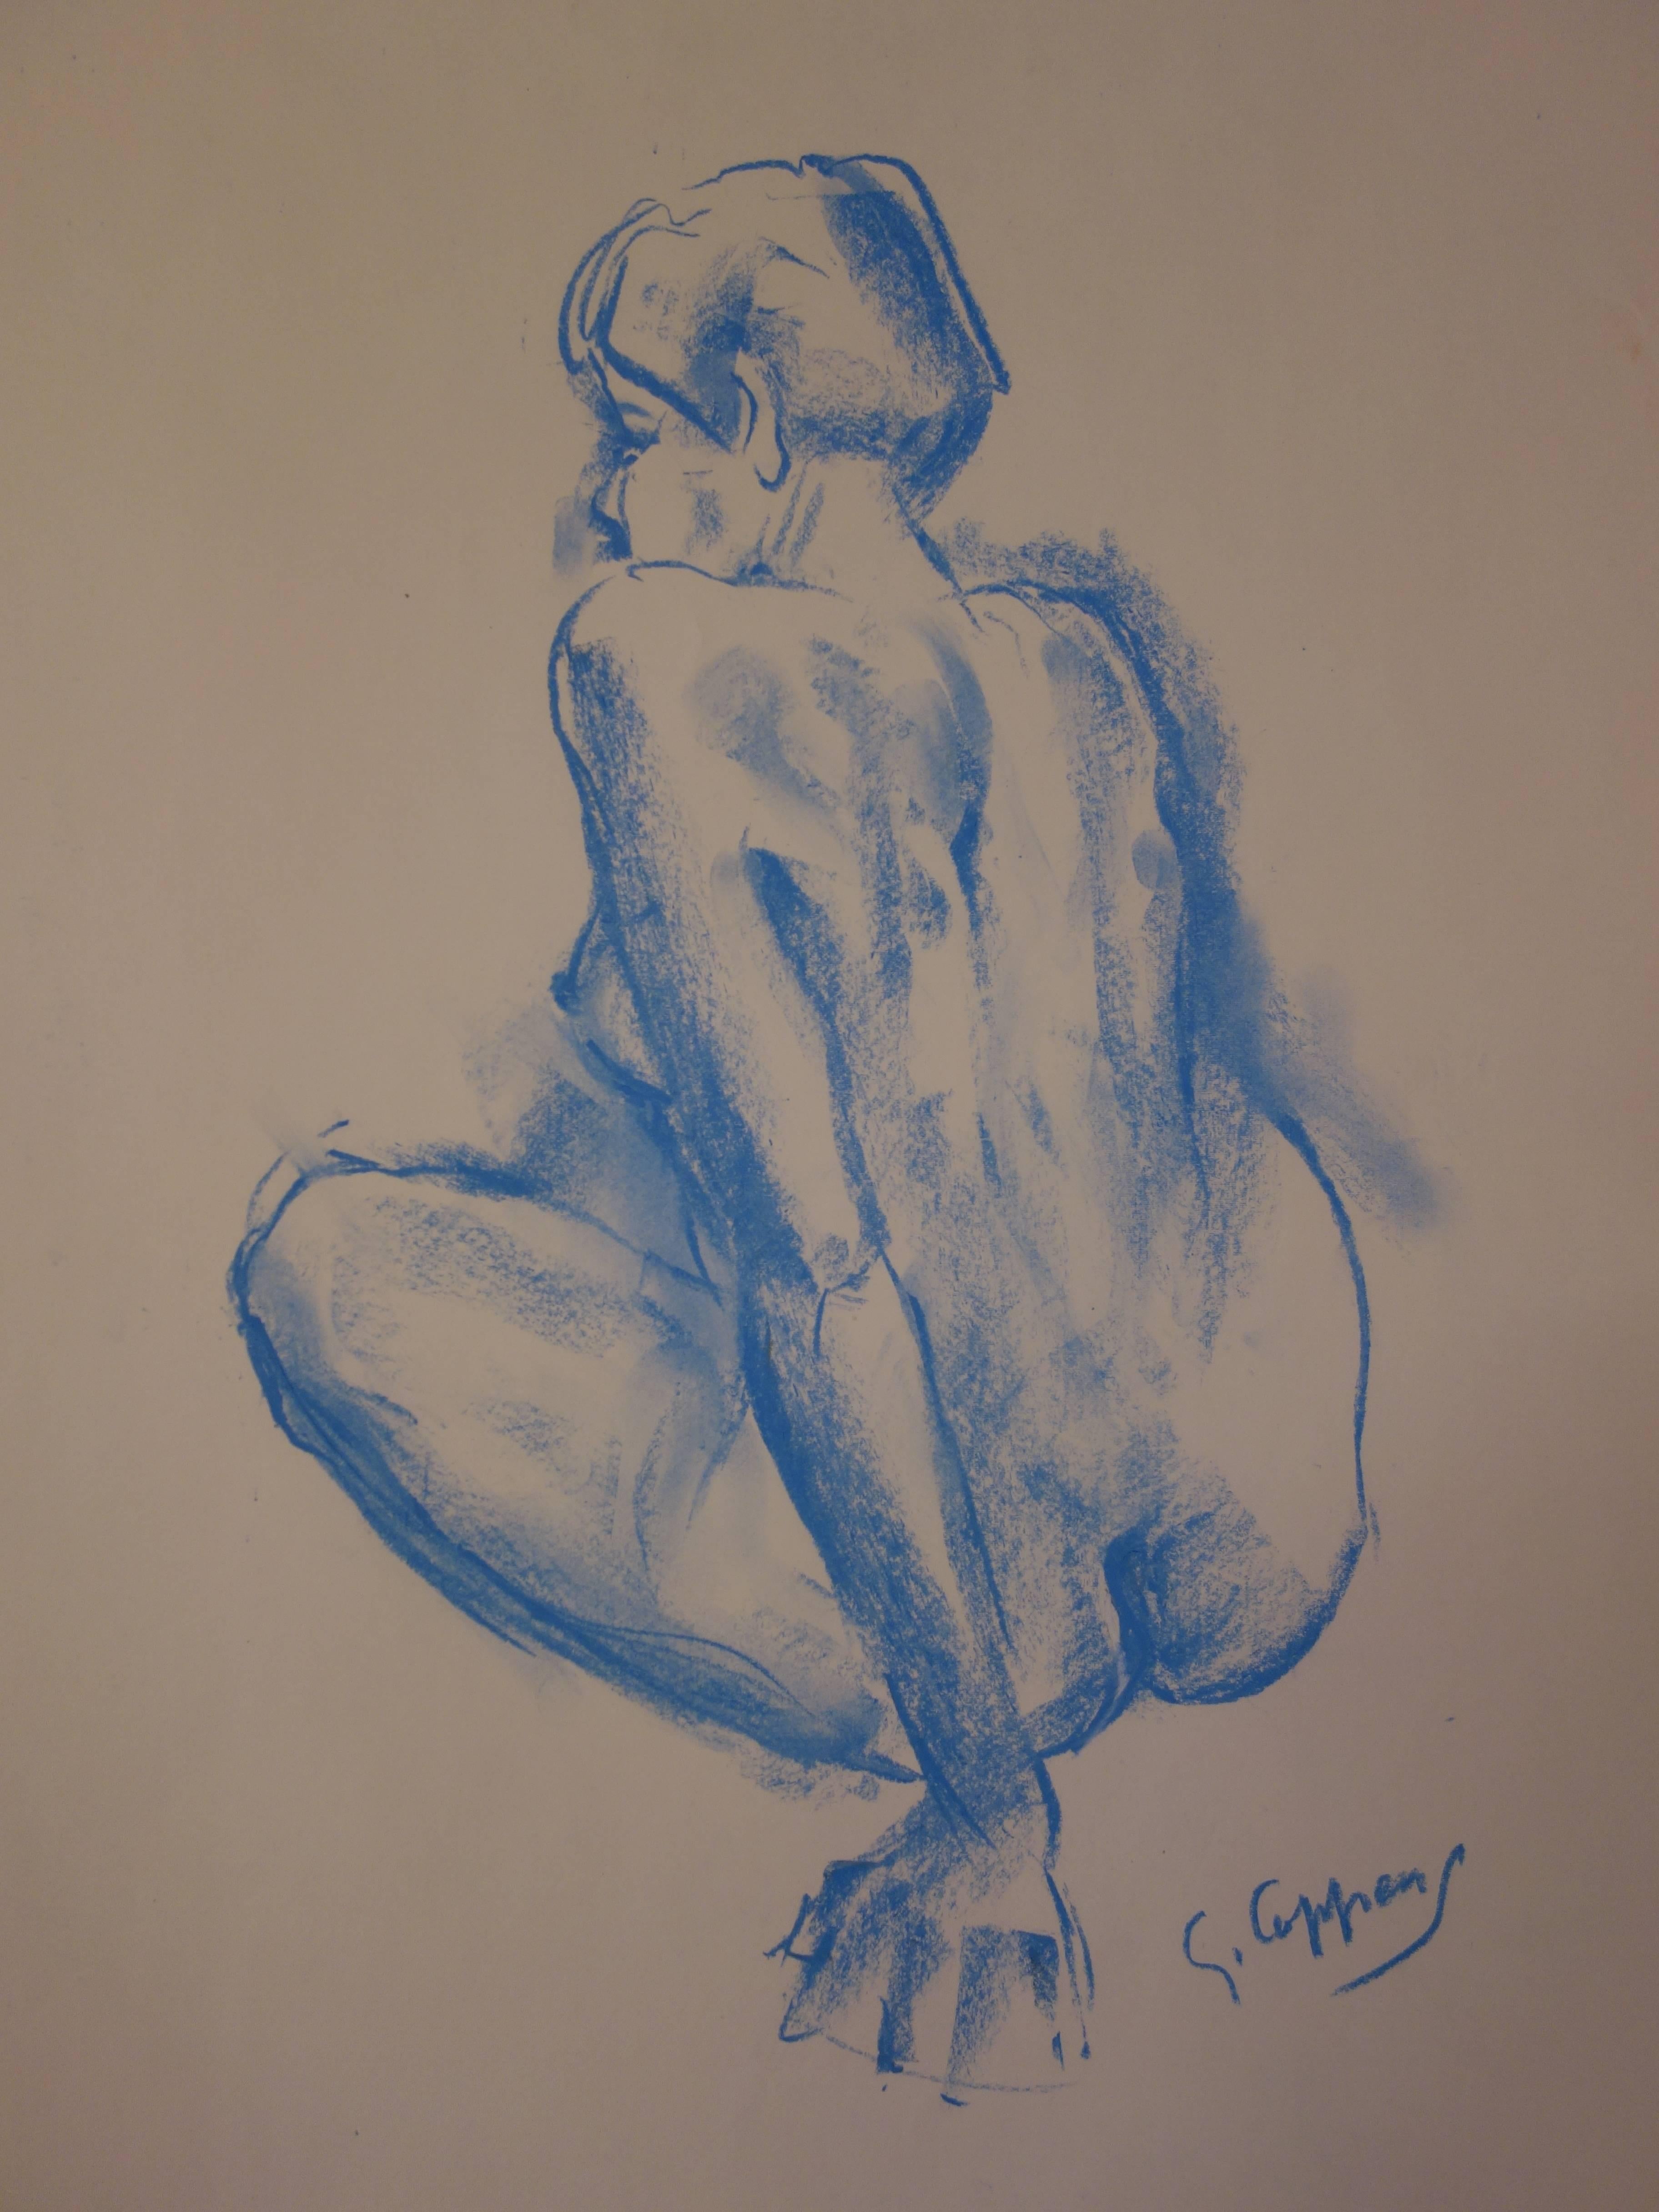 Model Getting Up - Original signed charcoals drawing - Modern Art by Gaston Coppens